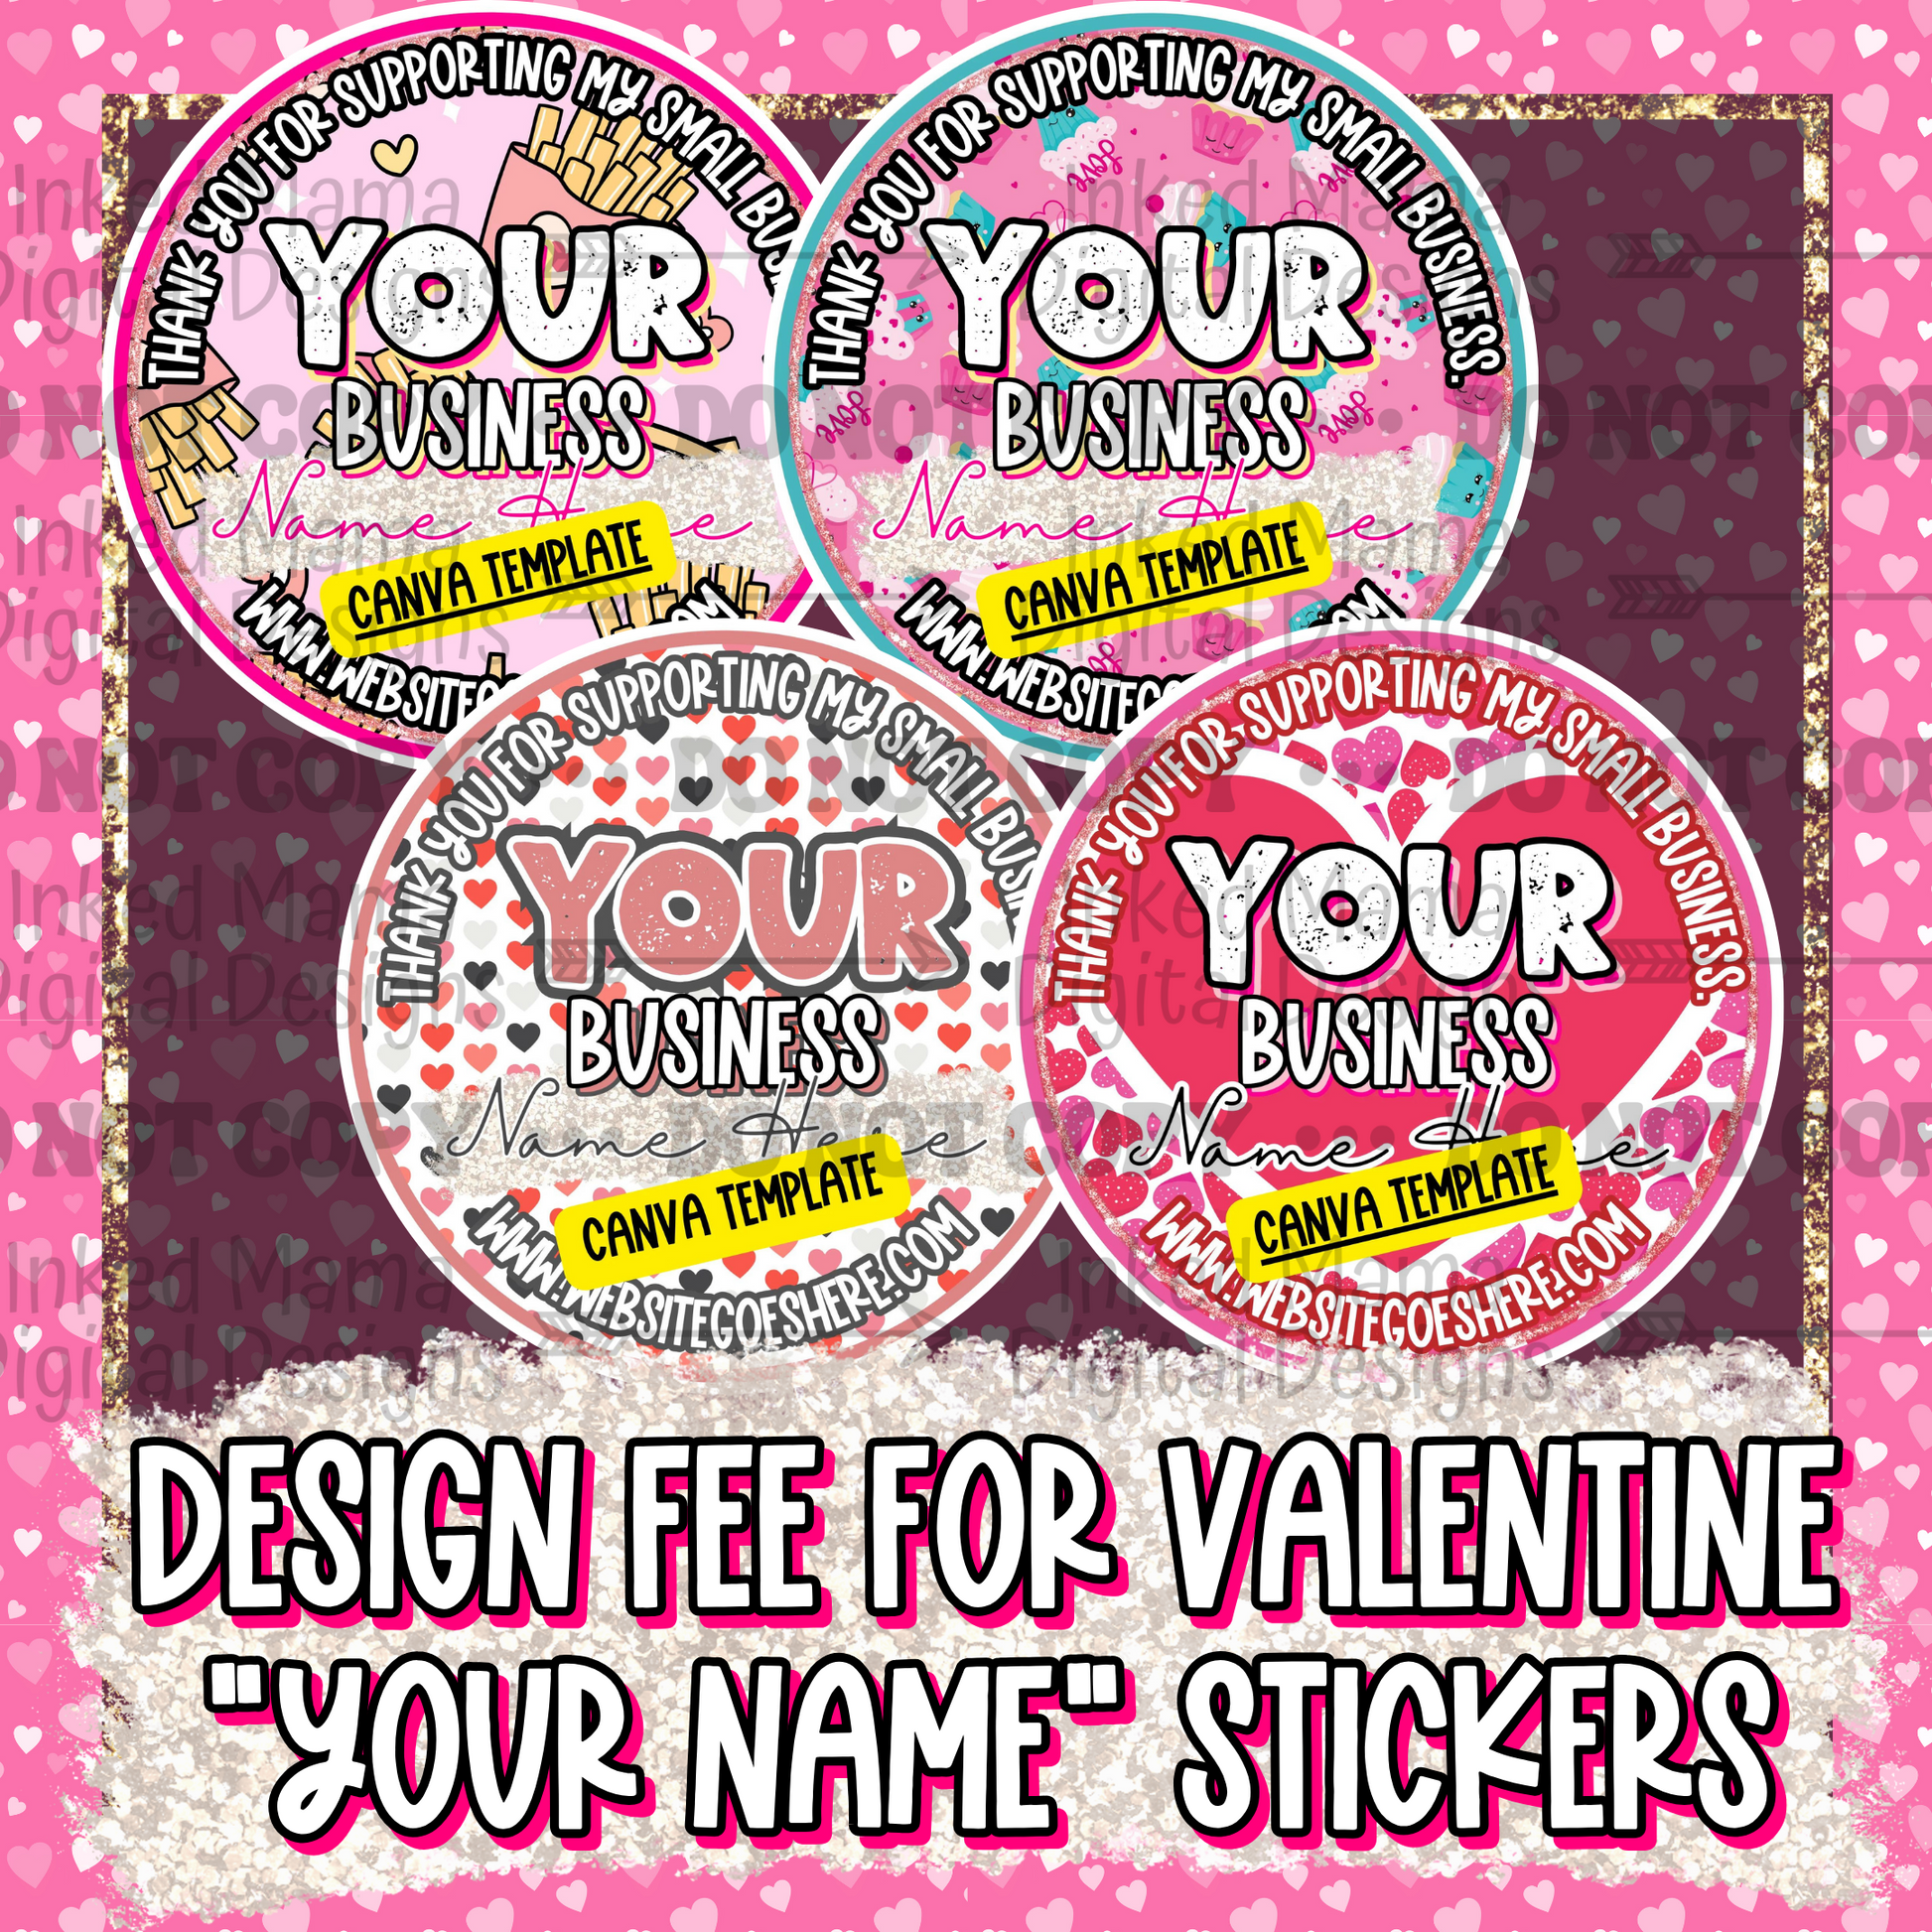 DESIGN FEE FOR 'Your Name', Small Business Valentines Stickers